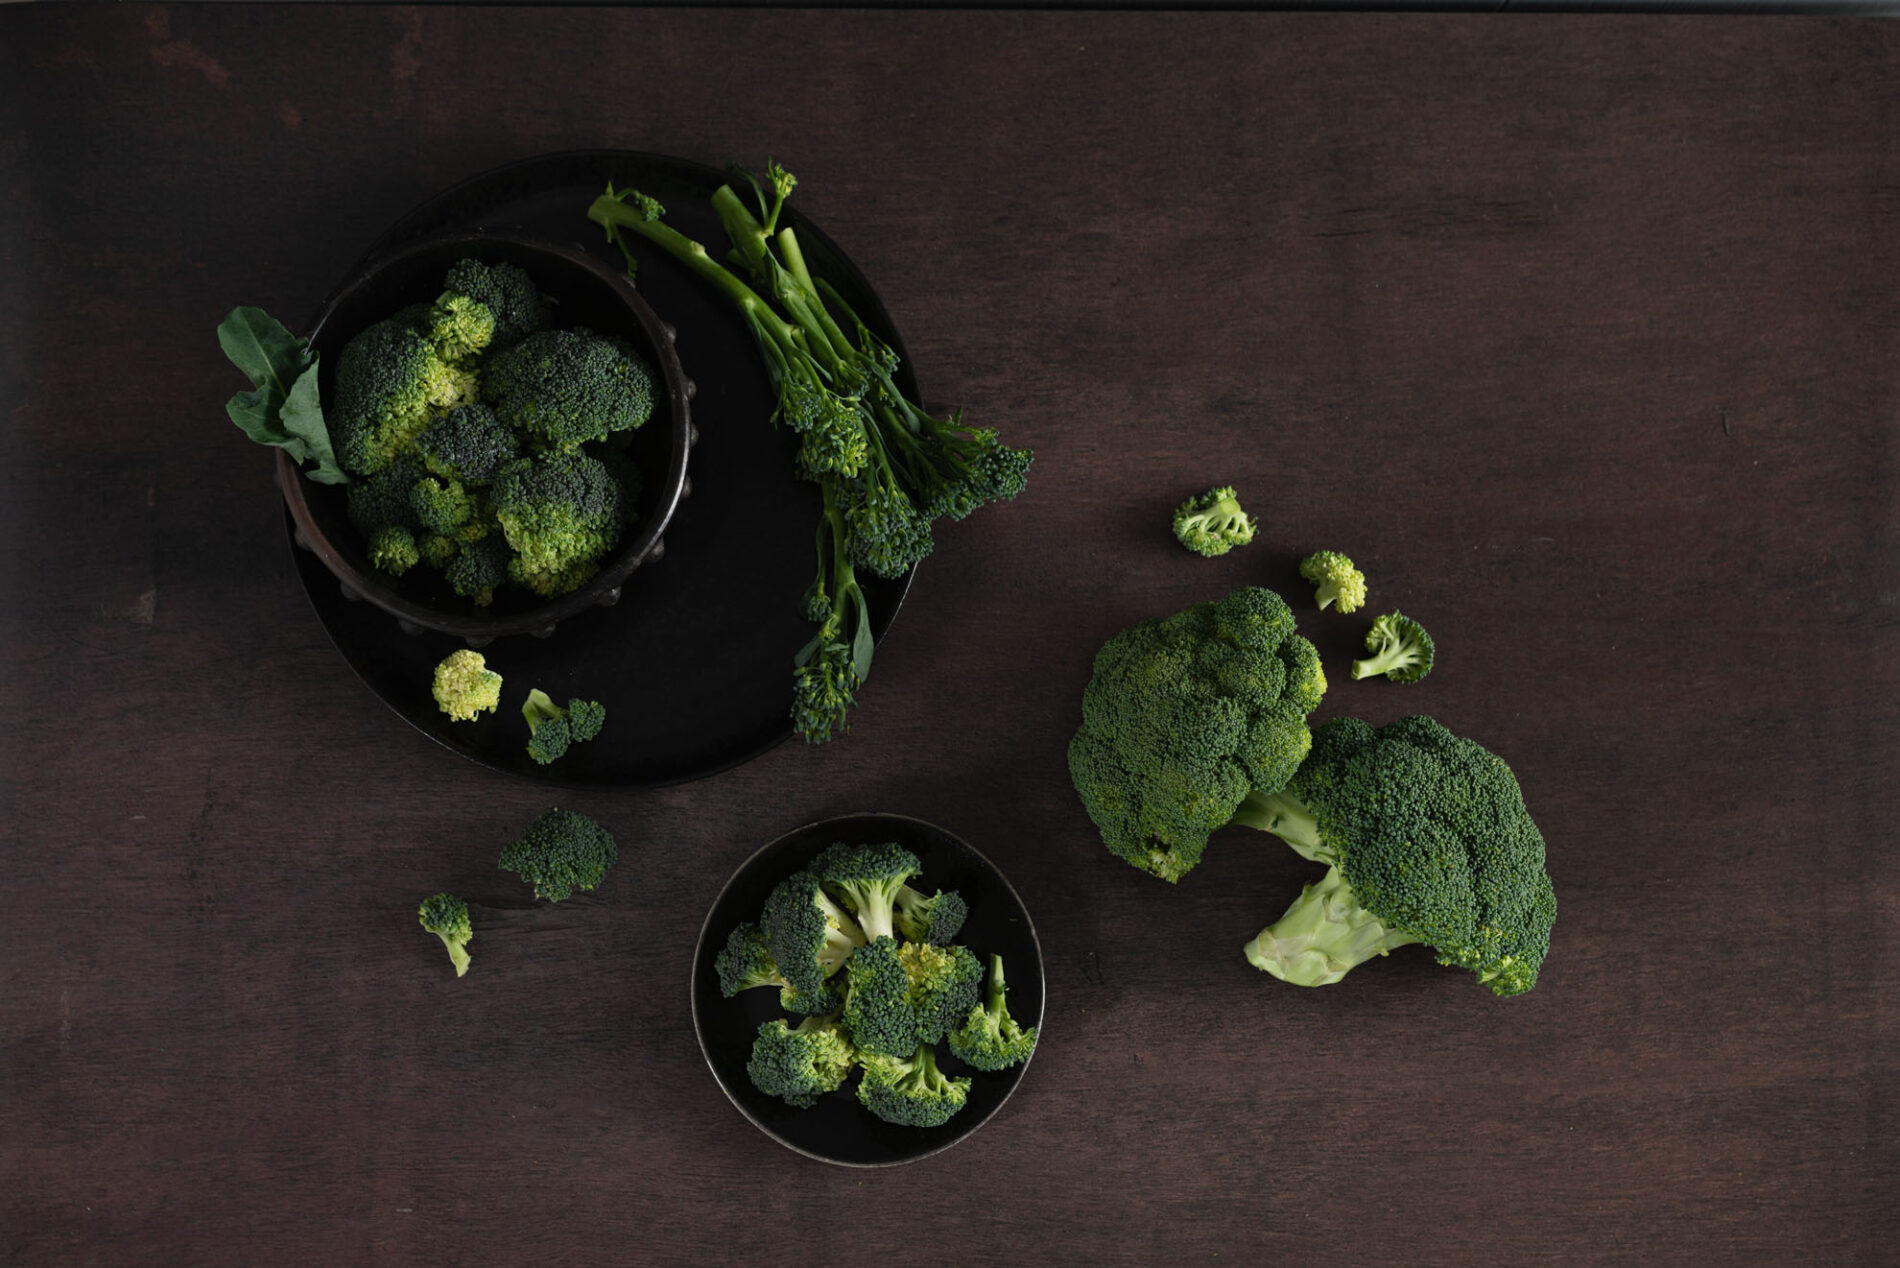 broccoli florets and heads arranged on dark brown surface